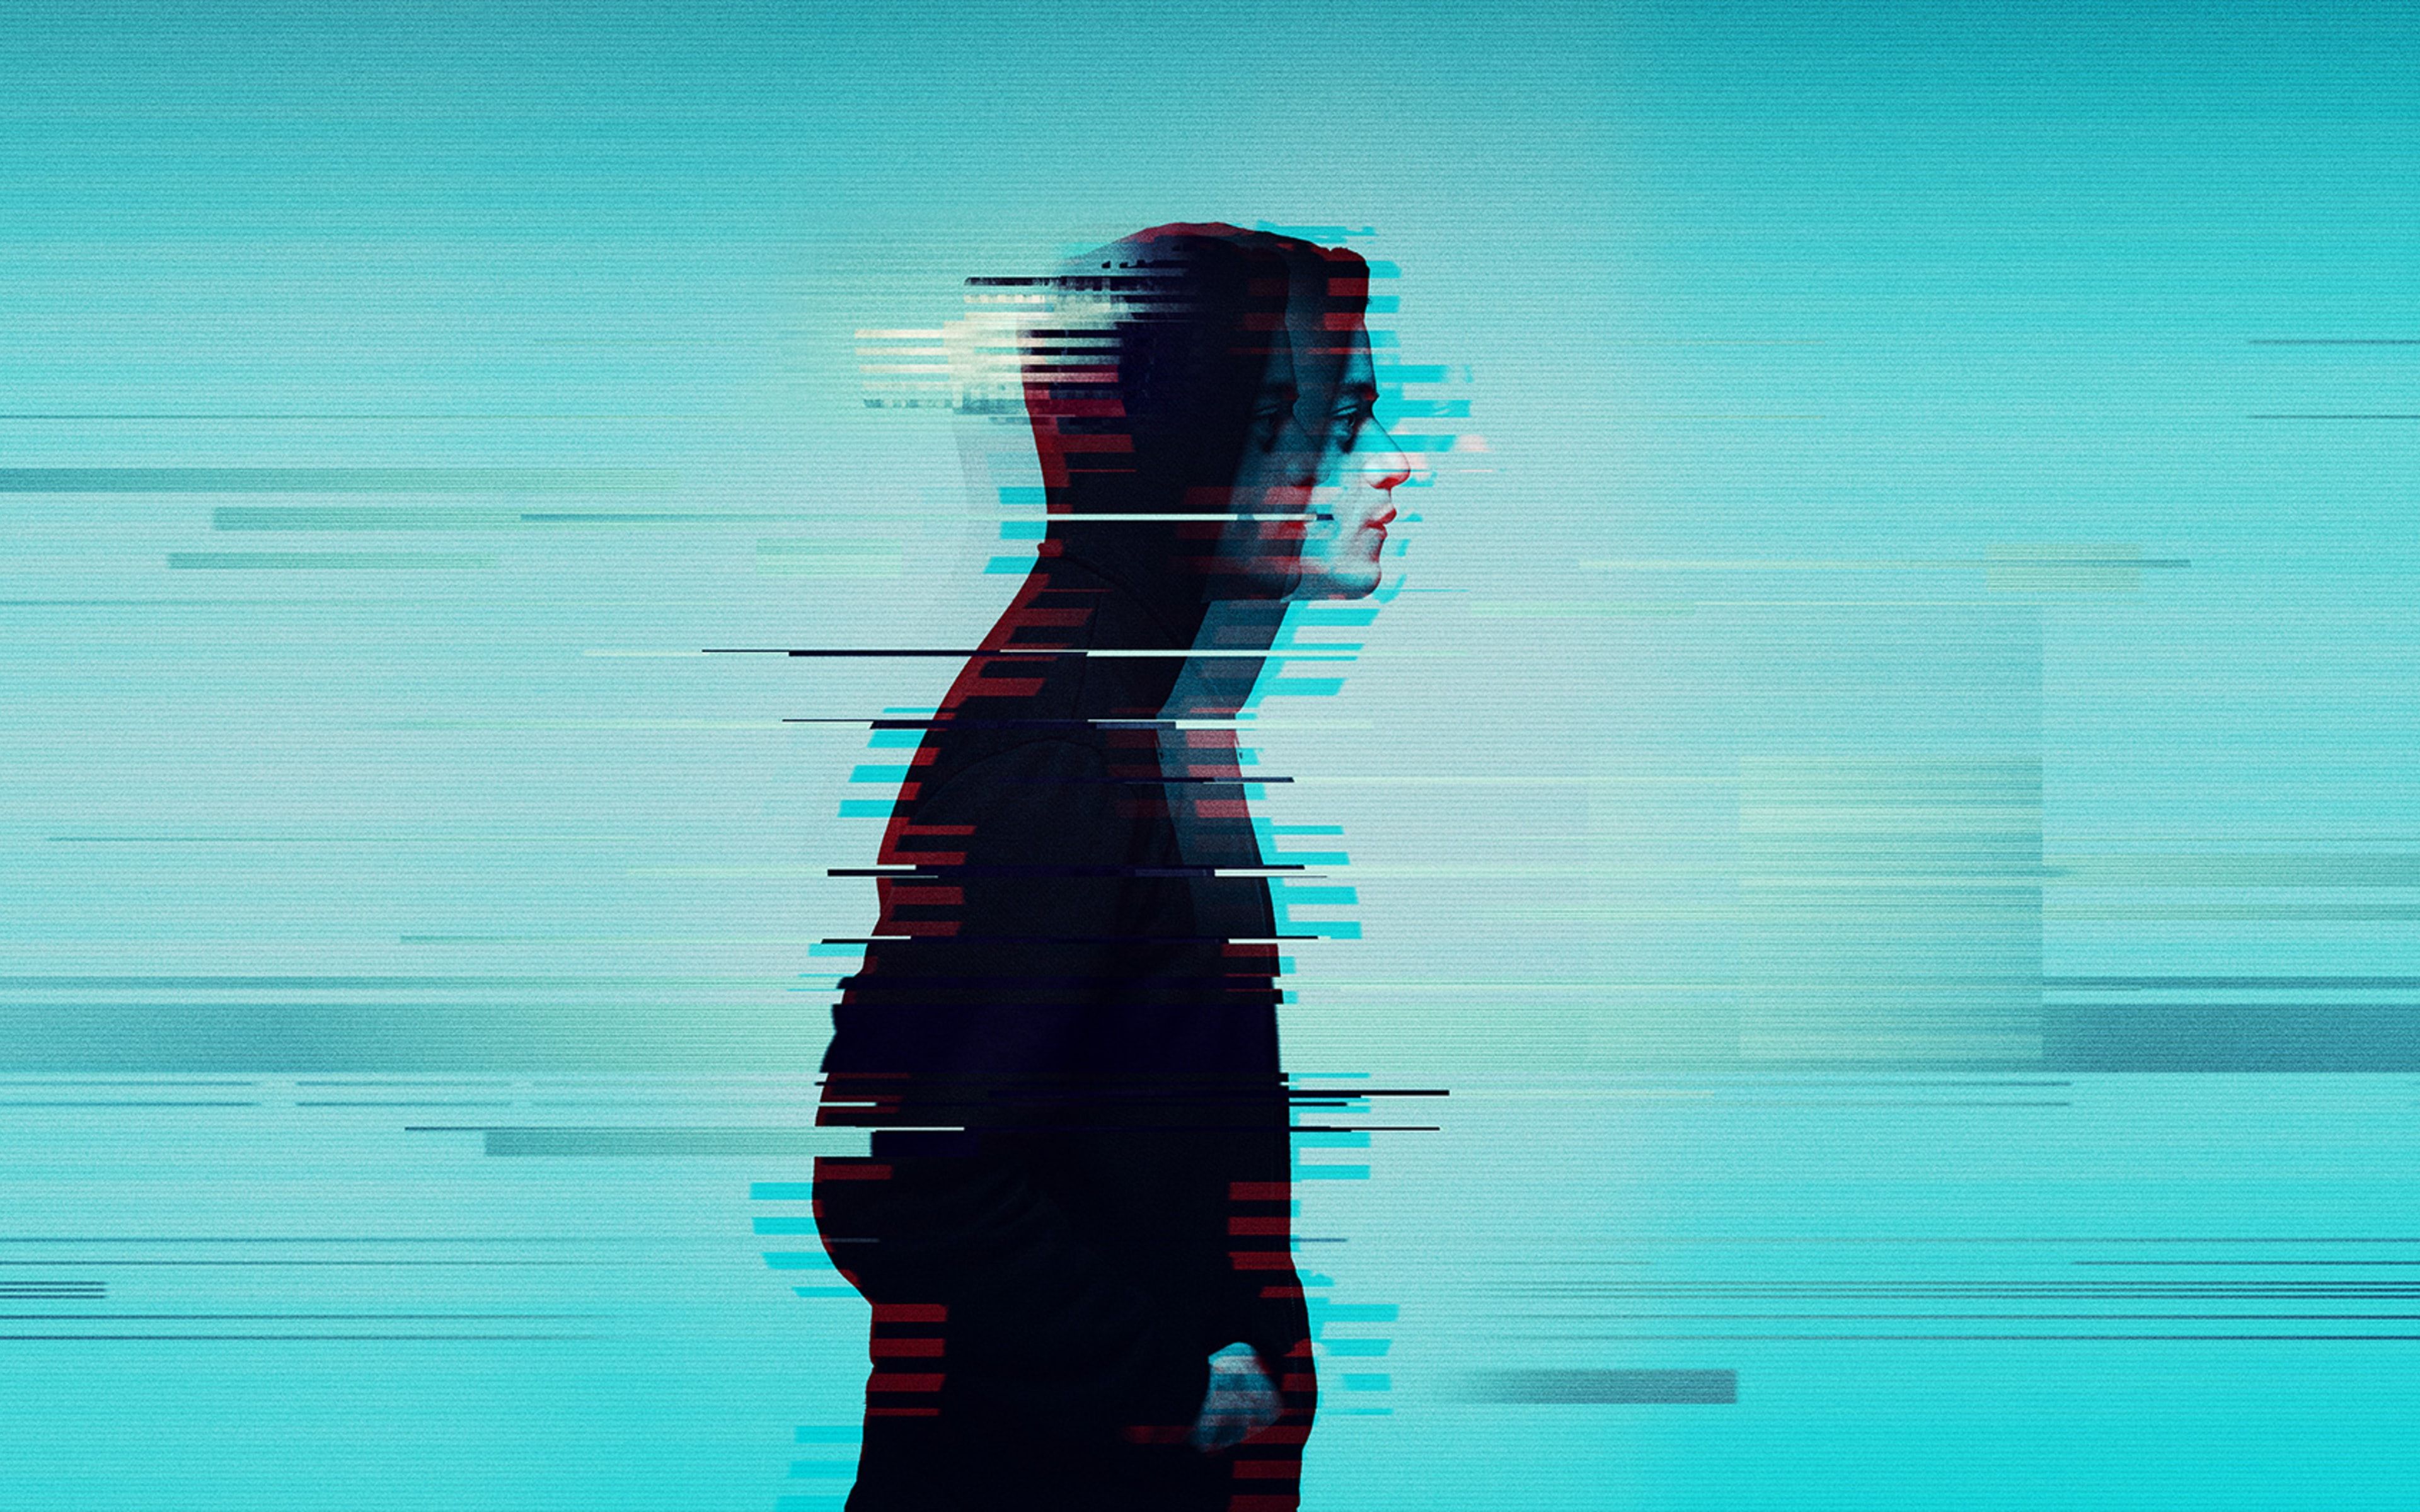 Mr Robot wallpaper by aeyzc - Download on ZEDGE™